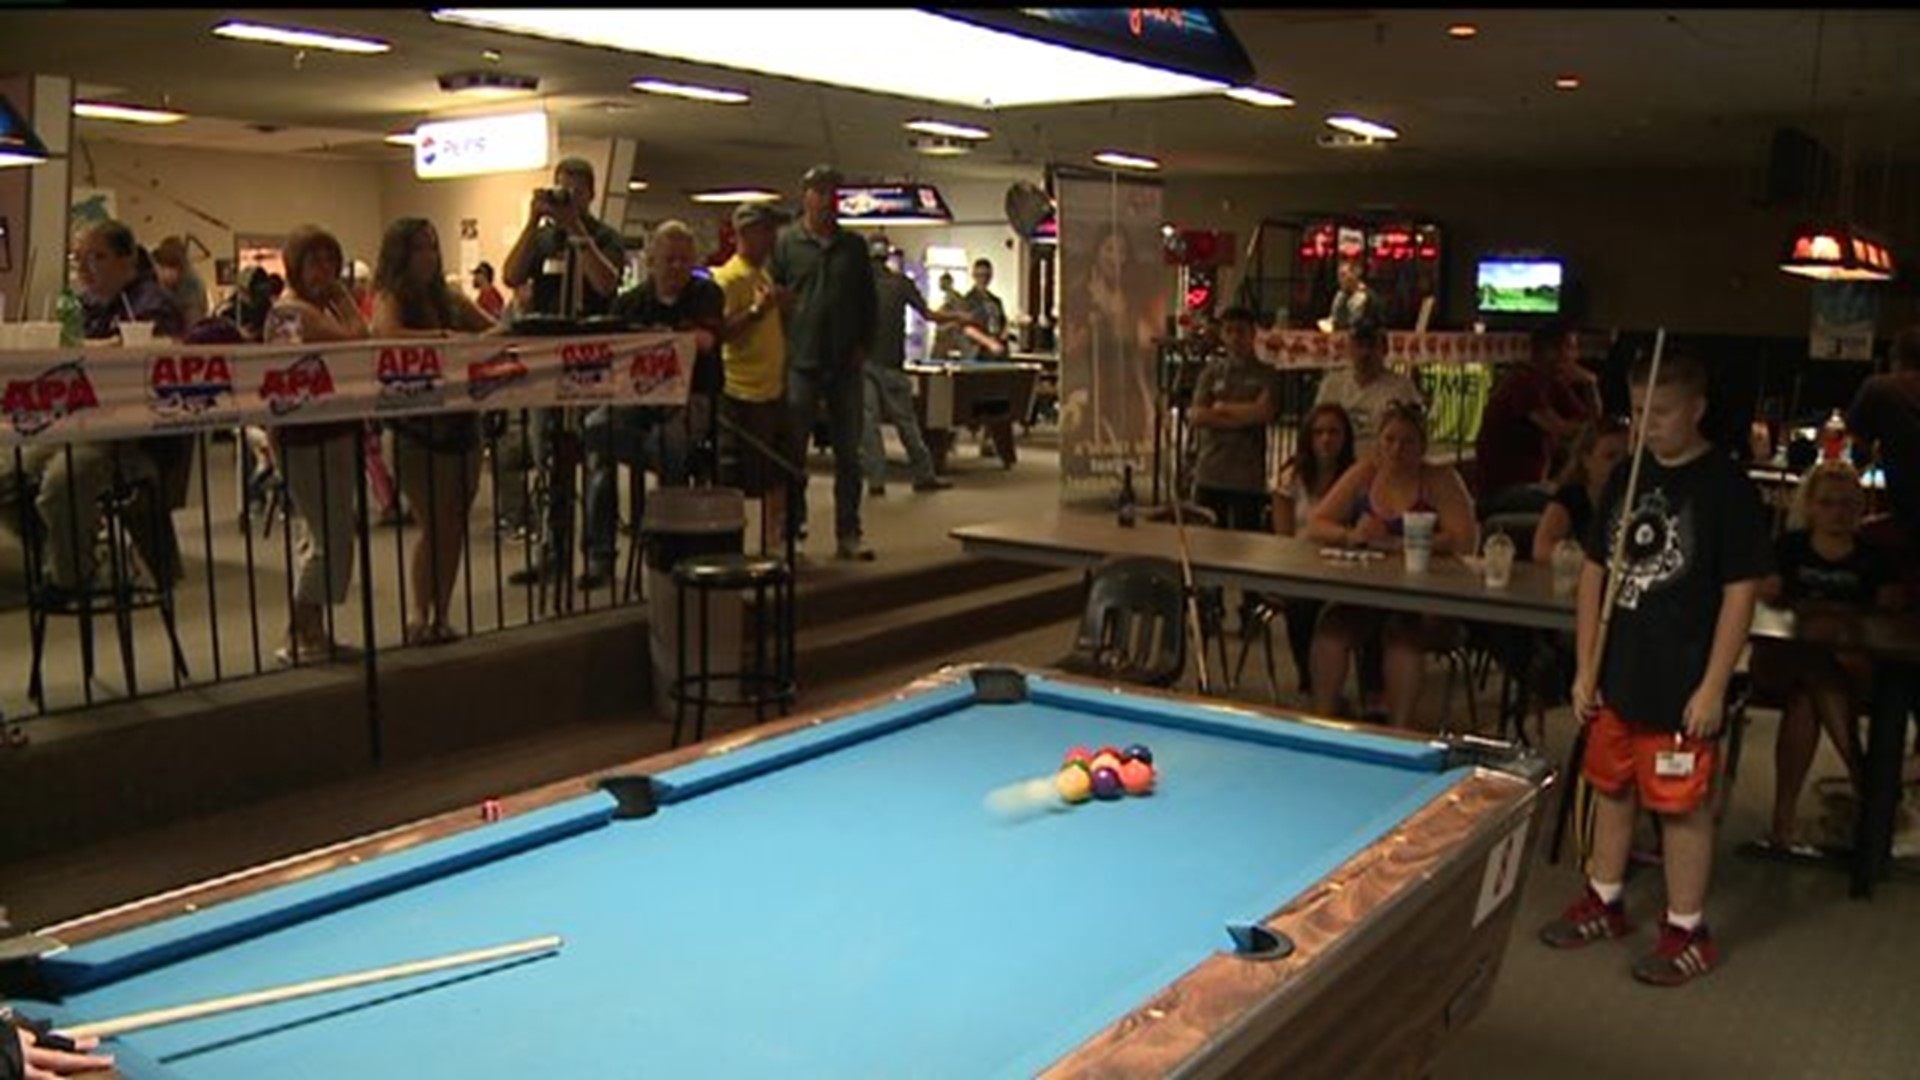 Kinds from all over the country gather for Junior National Pool Championship